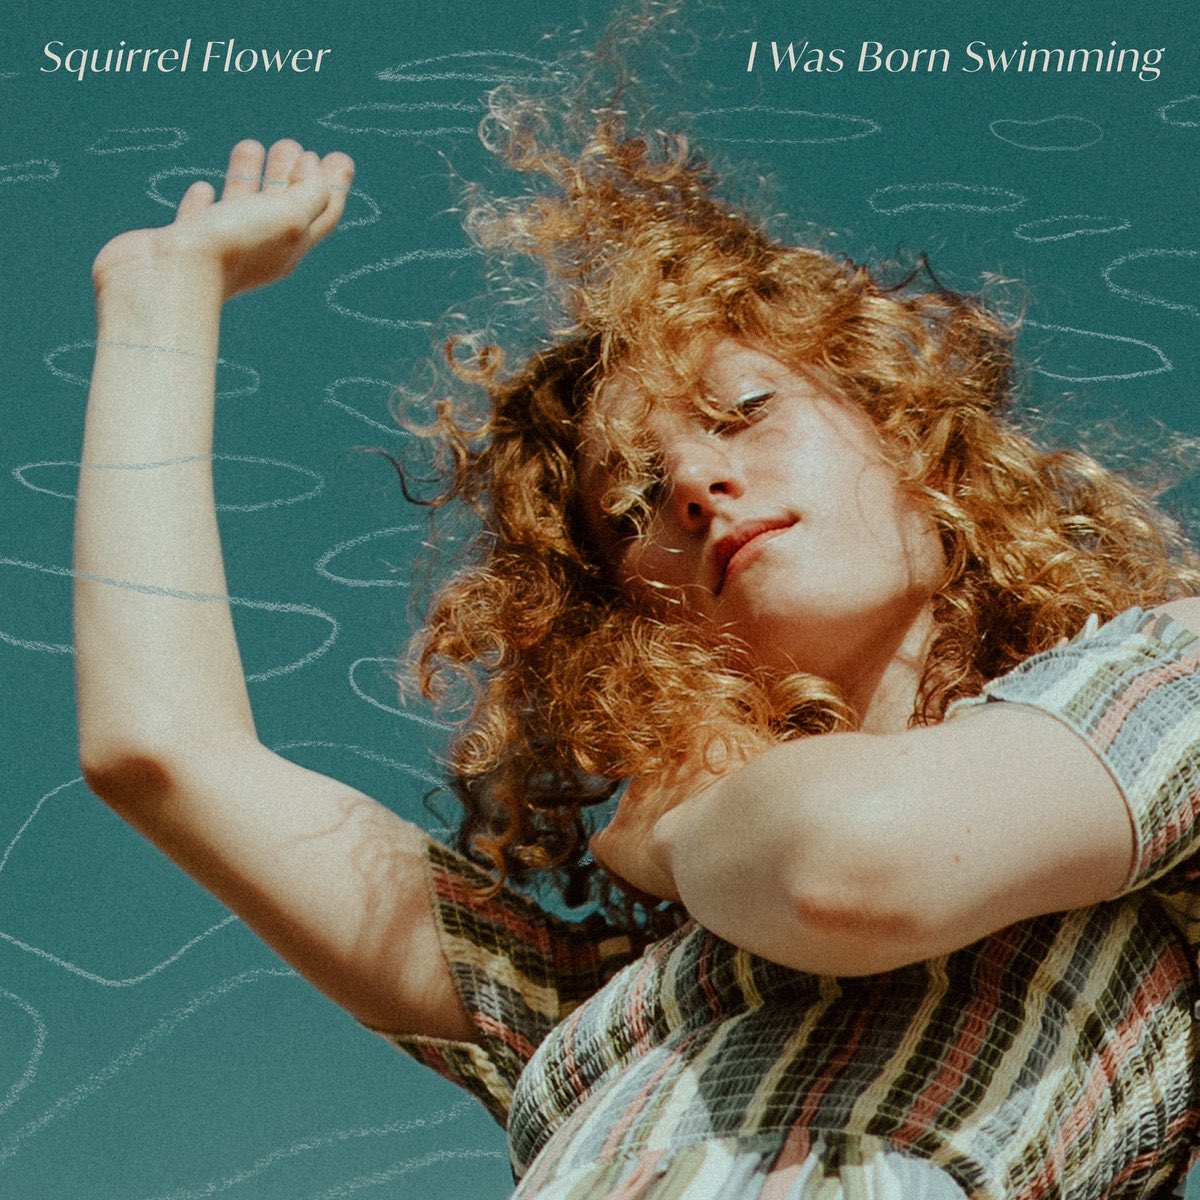 55. Squirrel Flower - I Was Born Swimming (I feel like there are 80 female fronted indie rock records like this every year but this one I like)